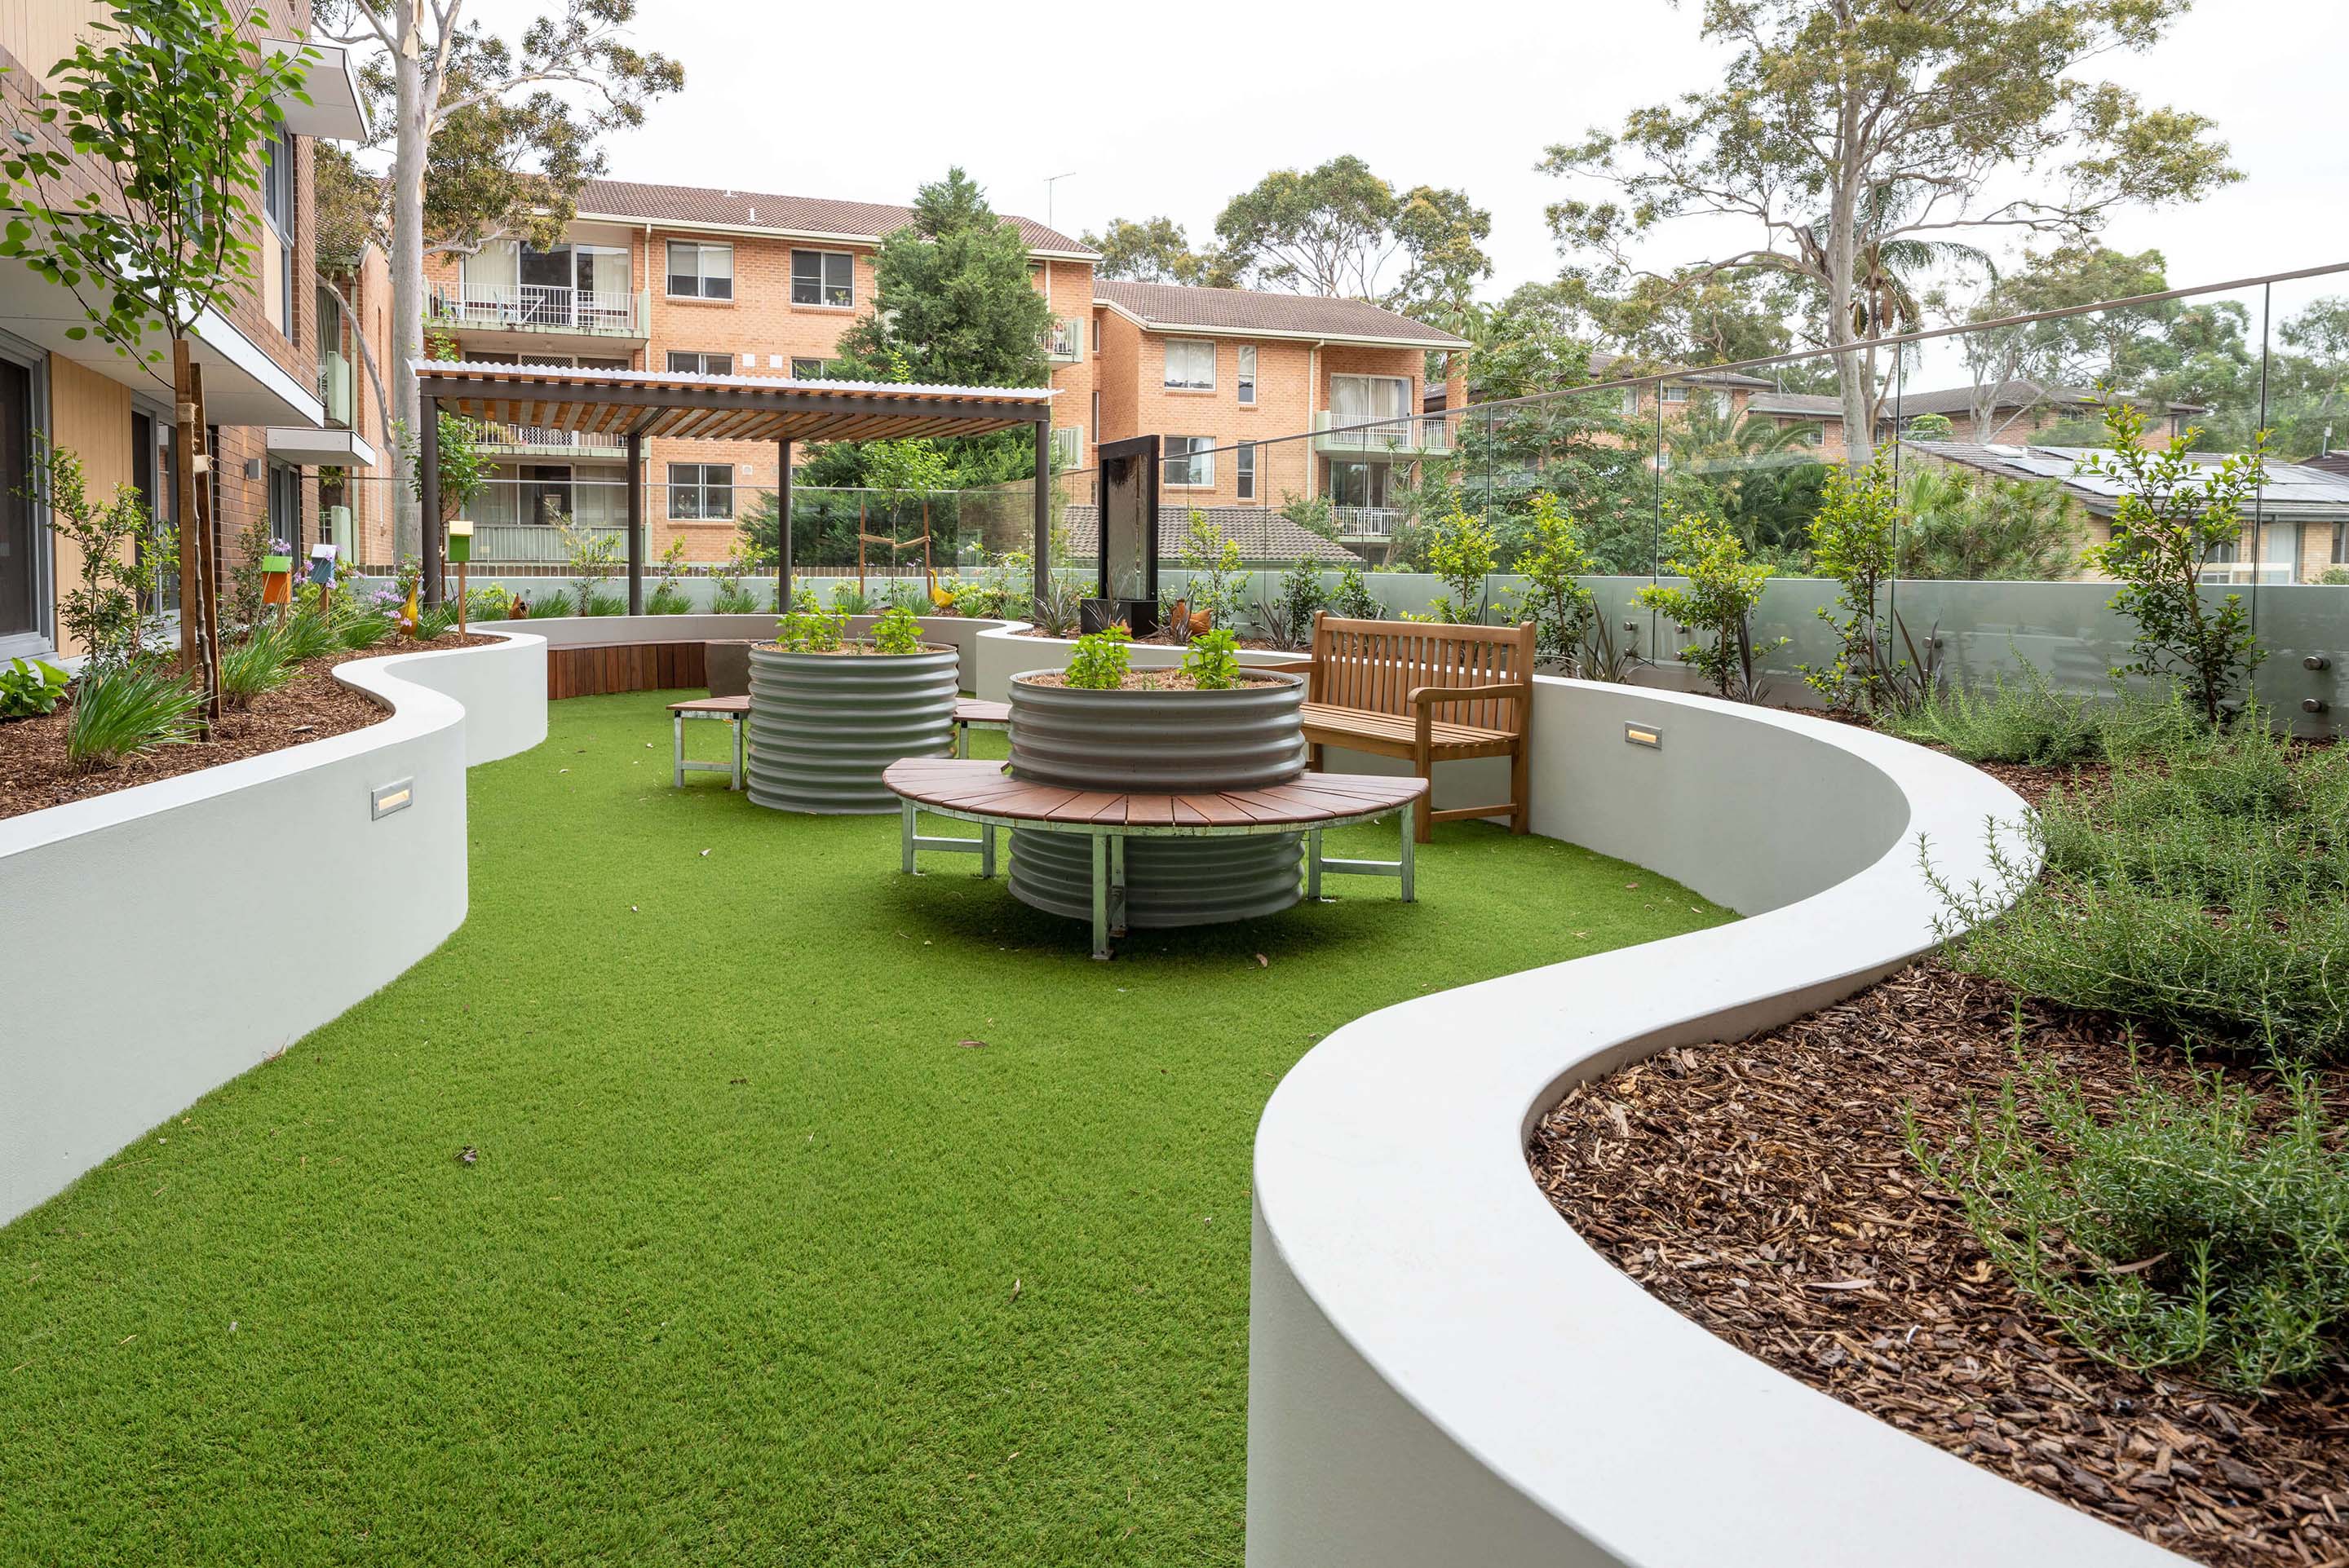 19 external landscaped village community area at uniting mayflower westmead taylor construction aged care